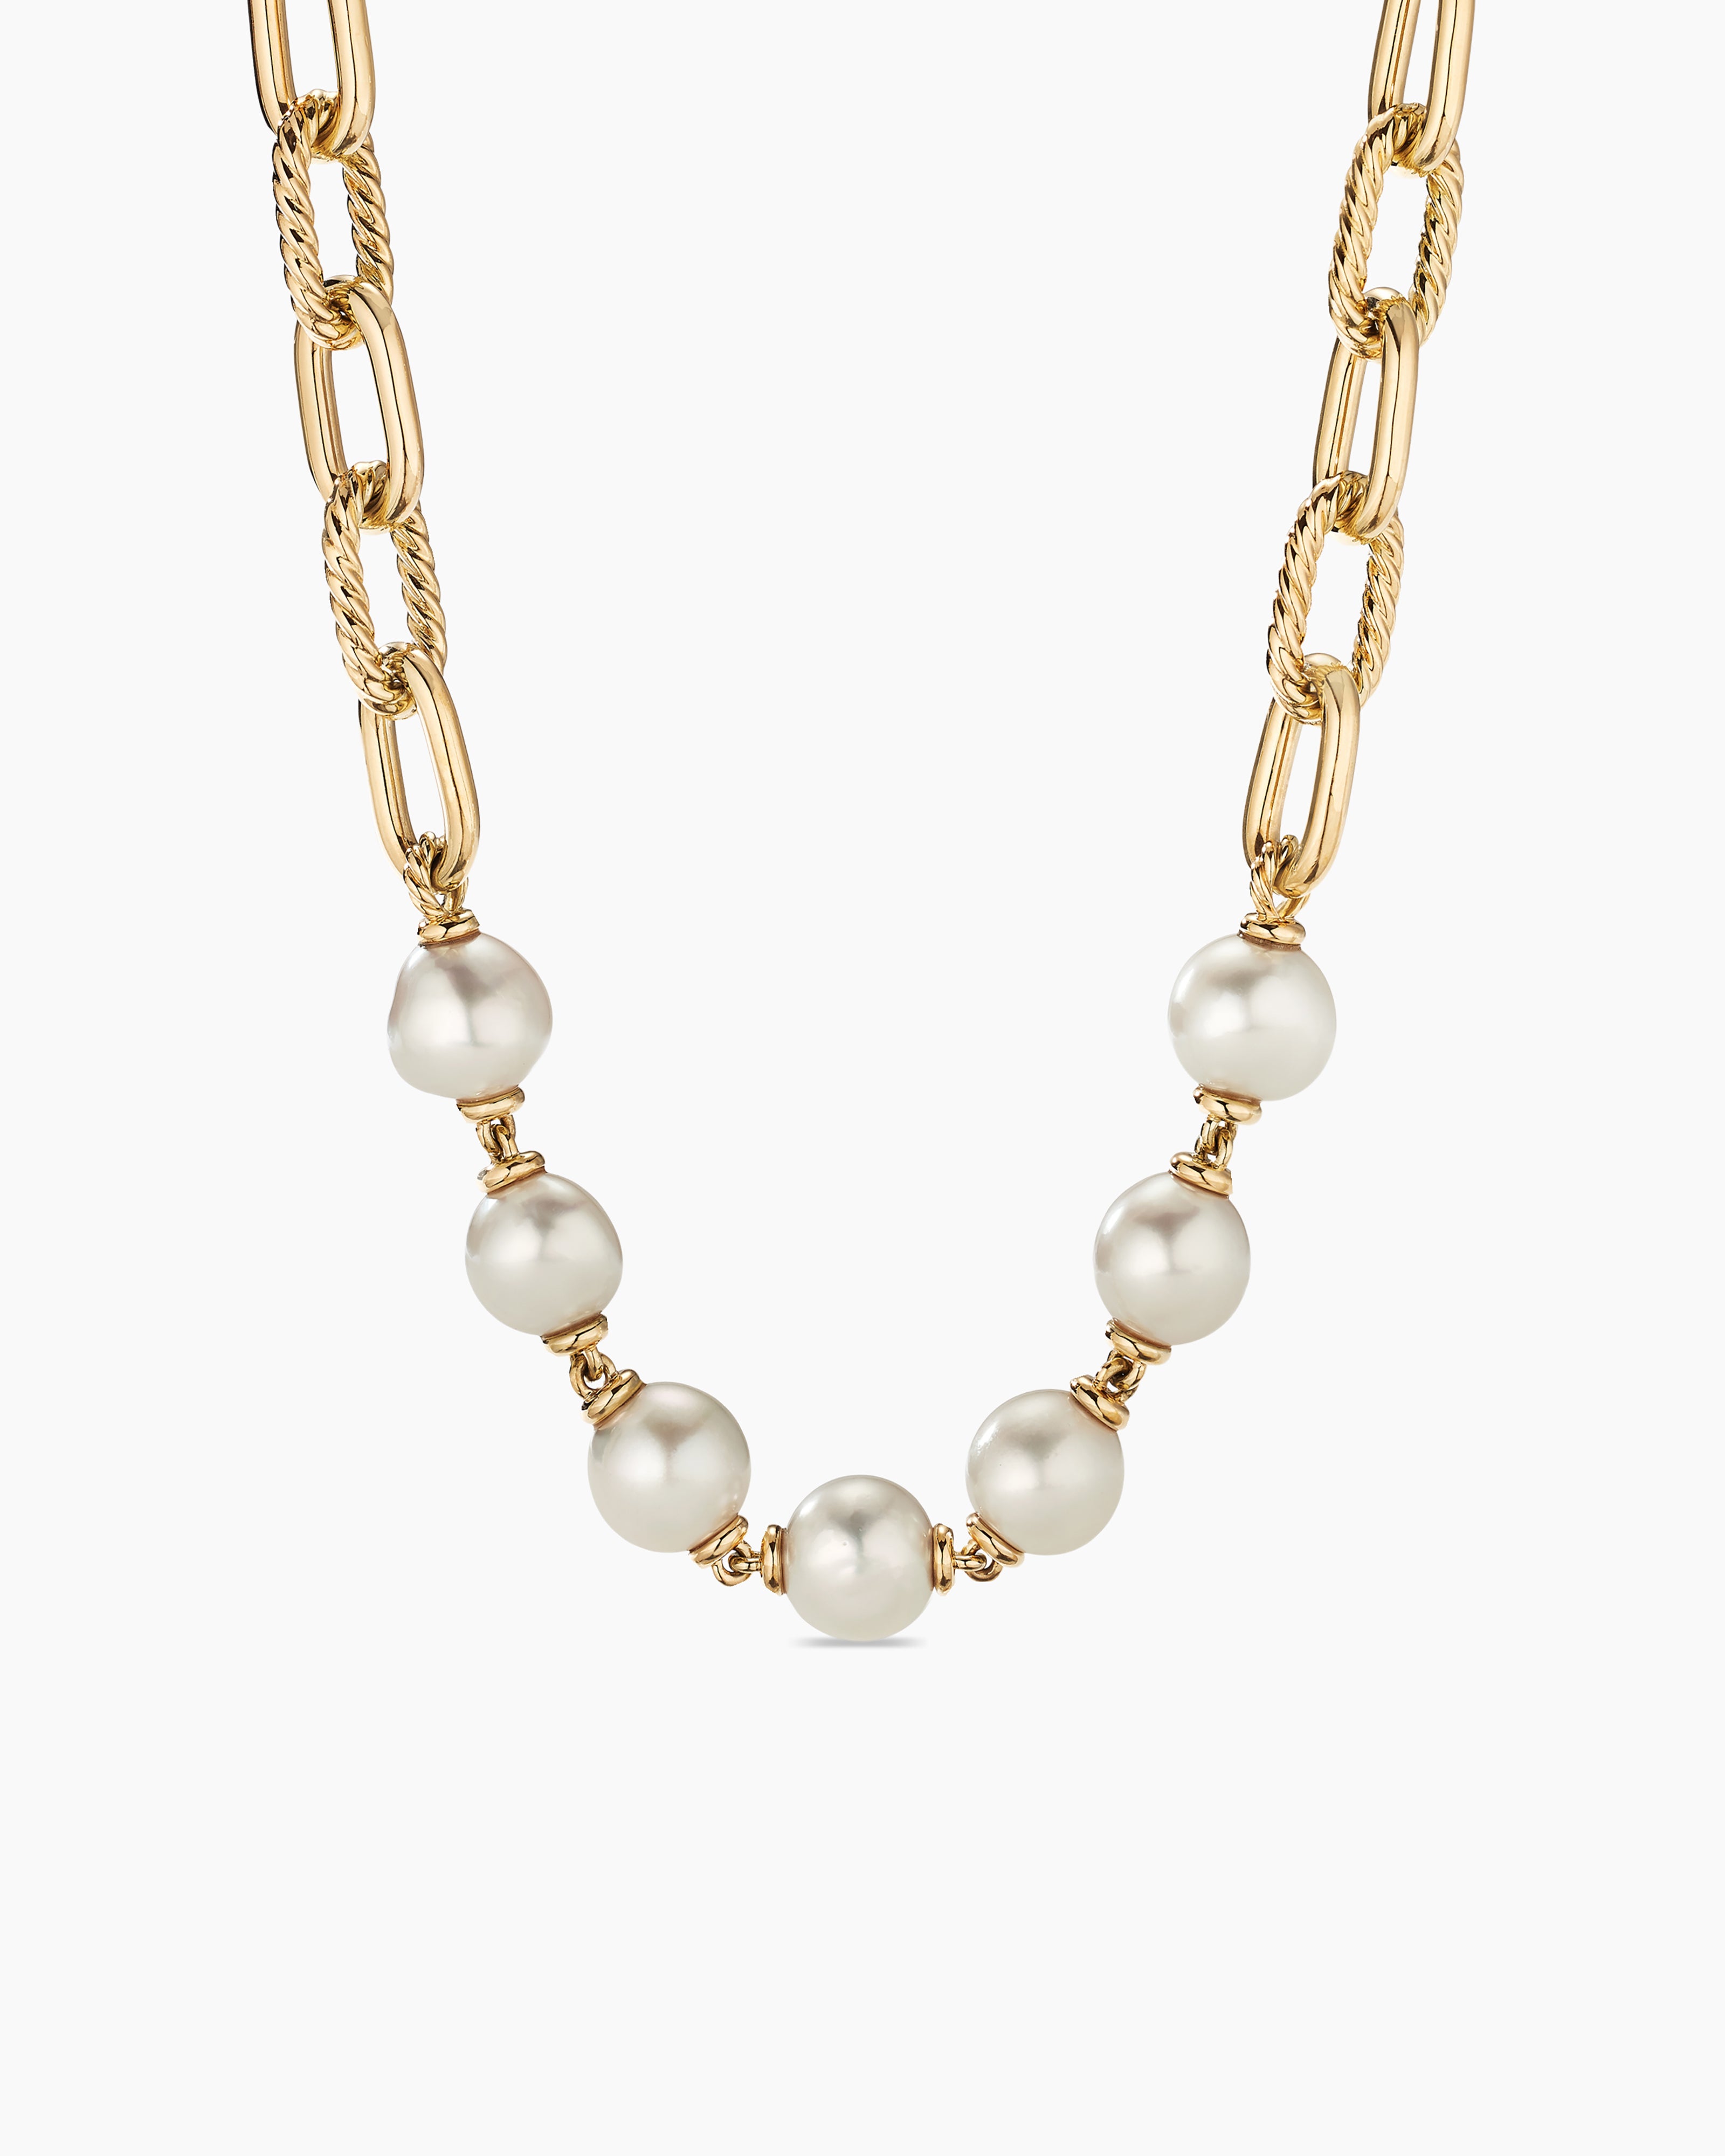 DY Madison Pearl Chain Necklace in 18K Yellow Gold, 13mm